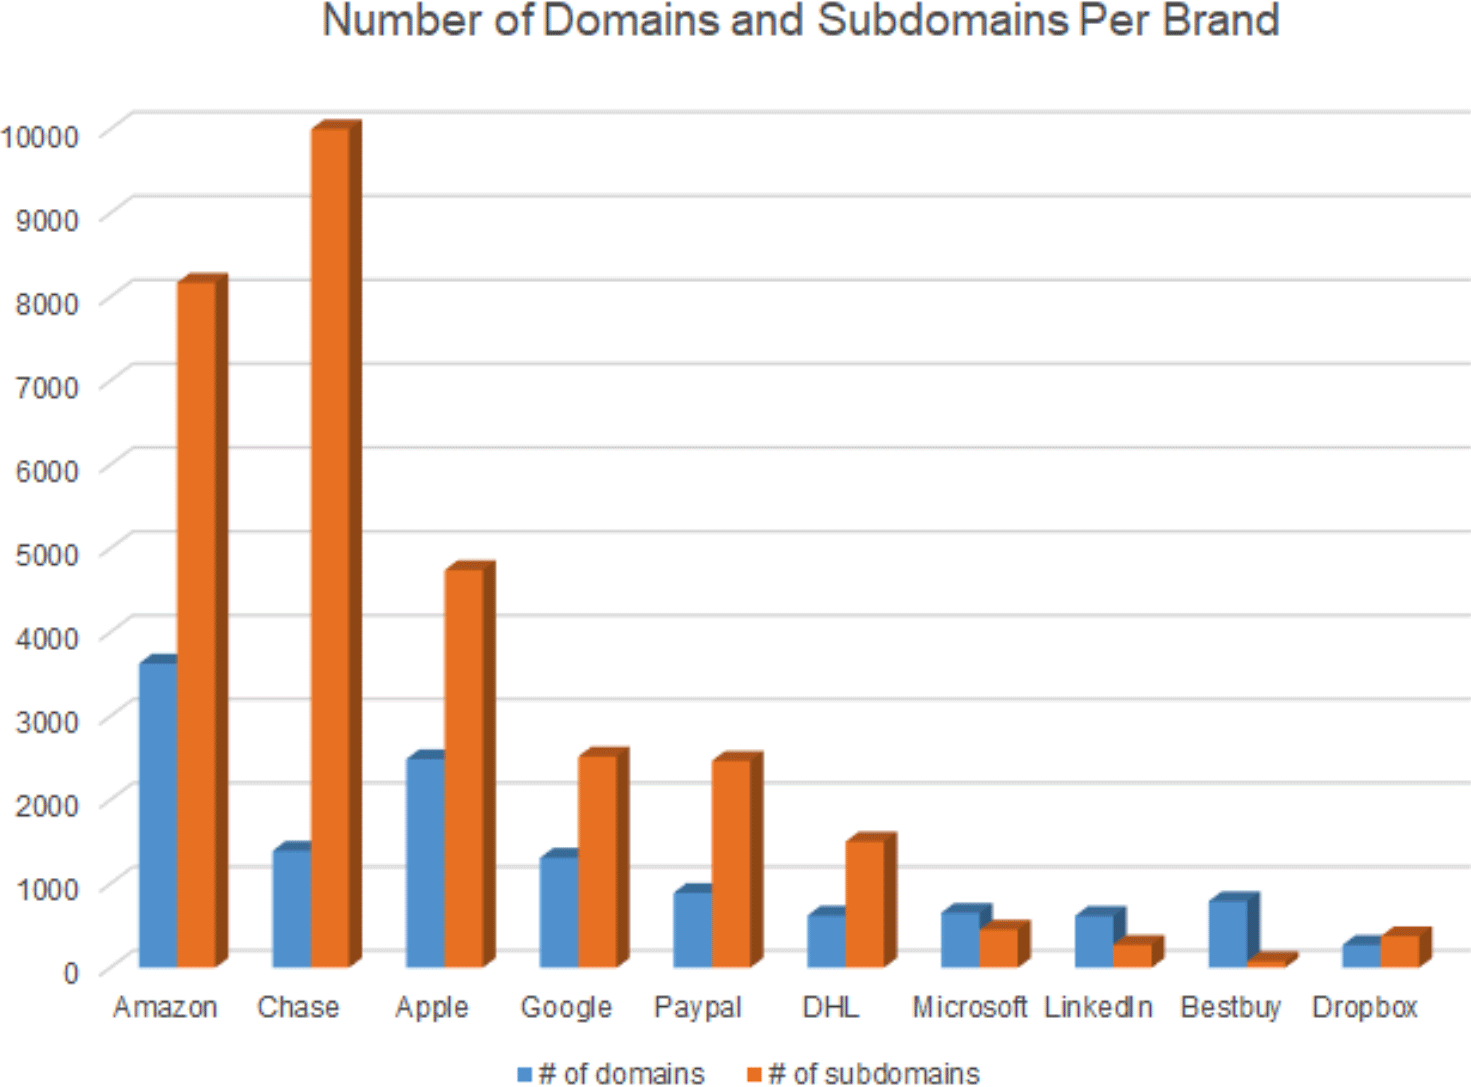 Q2 2021 Top 10 Most Impersonated Brands in Domains 3